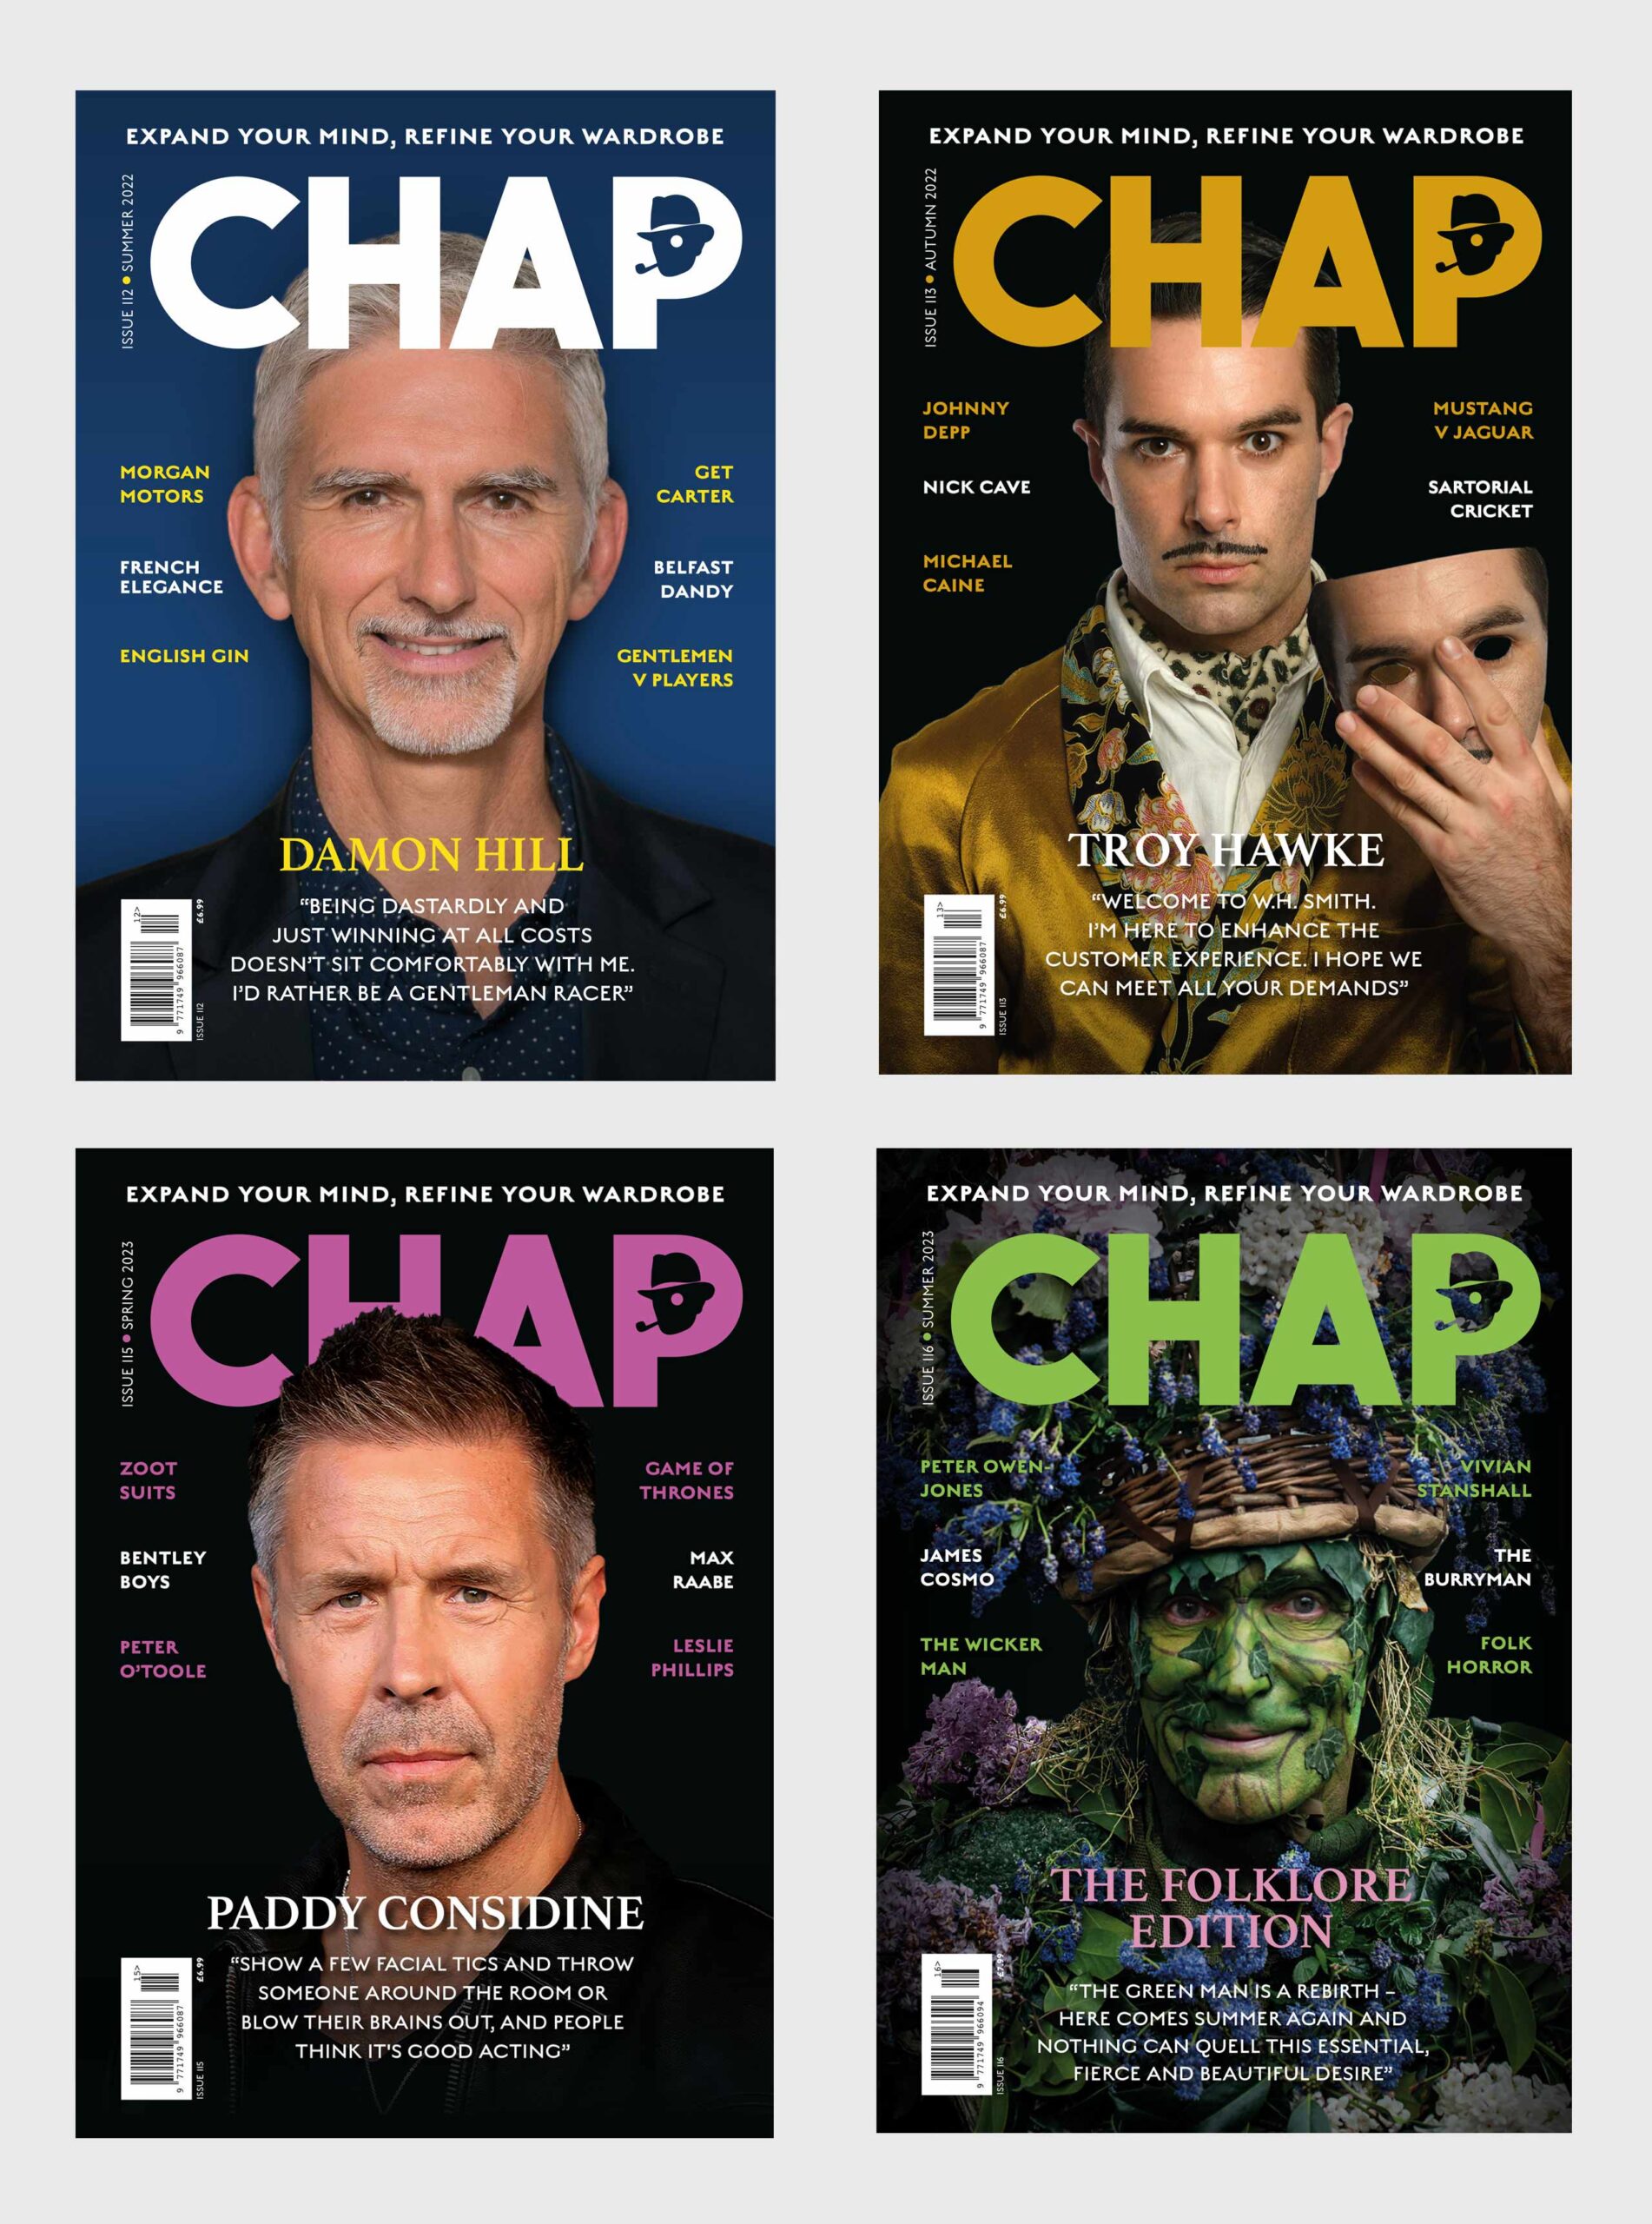 The Chap Covers